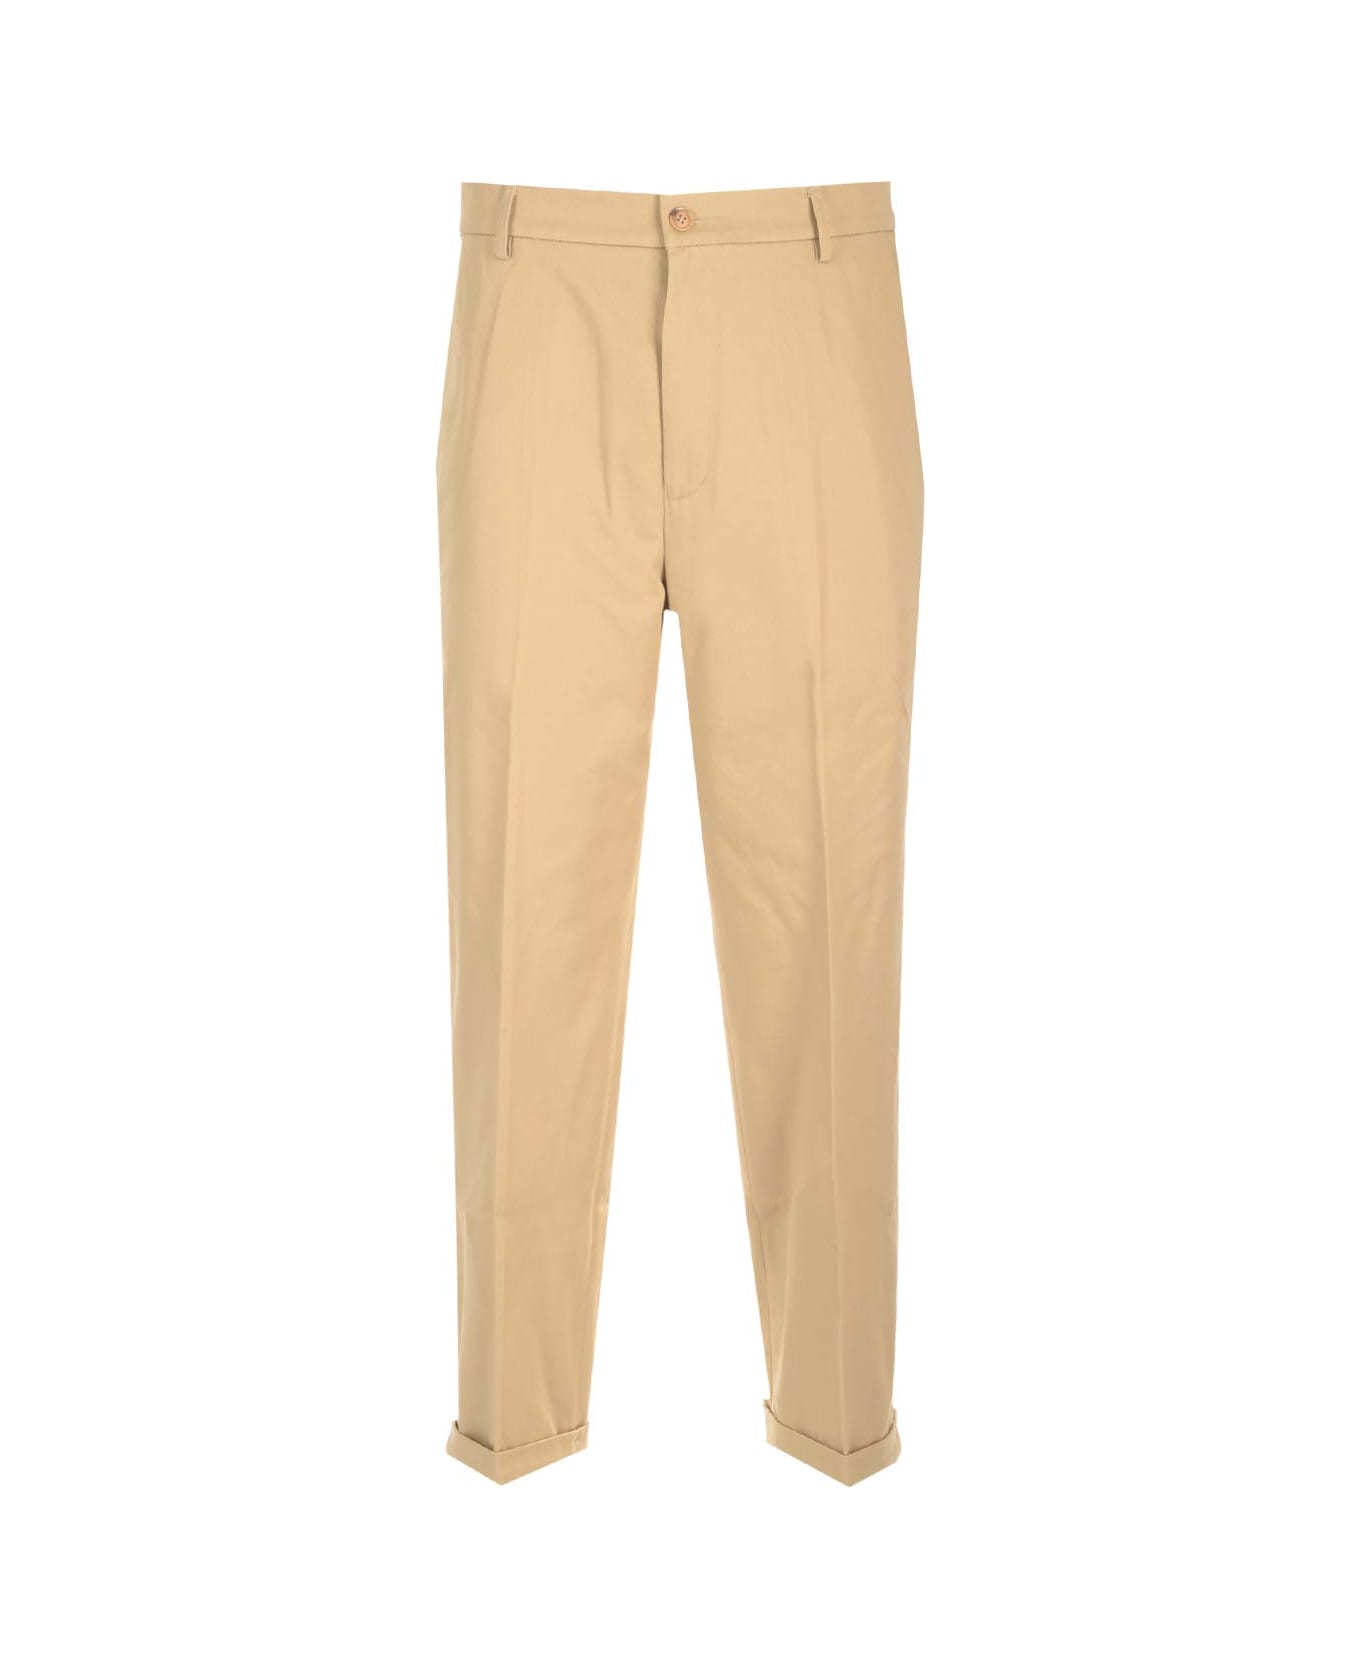 Kenzo Cotton Trousers - Beige ボトムス